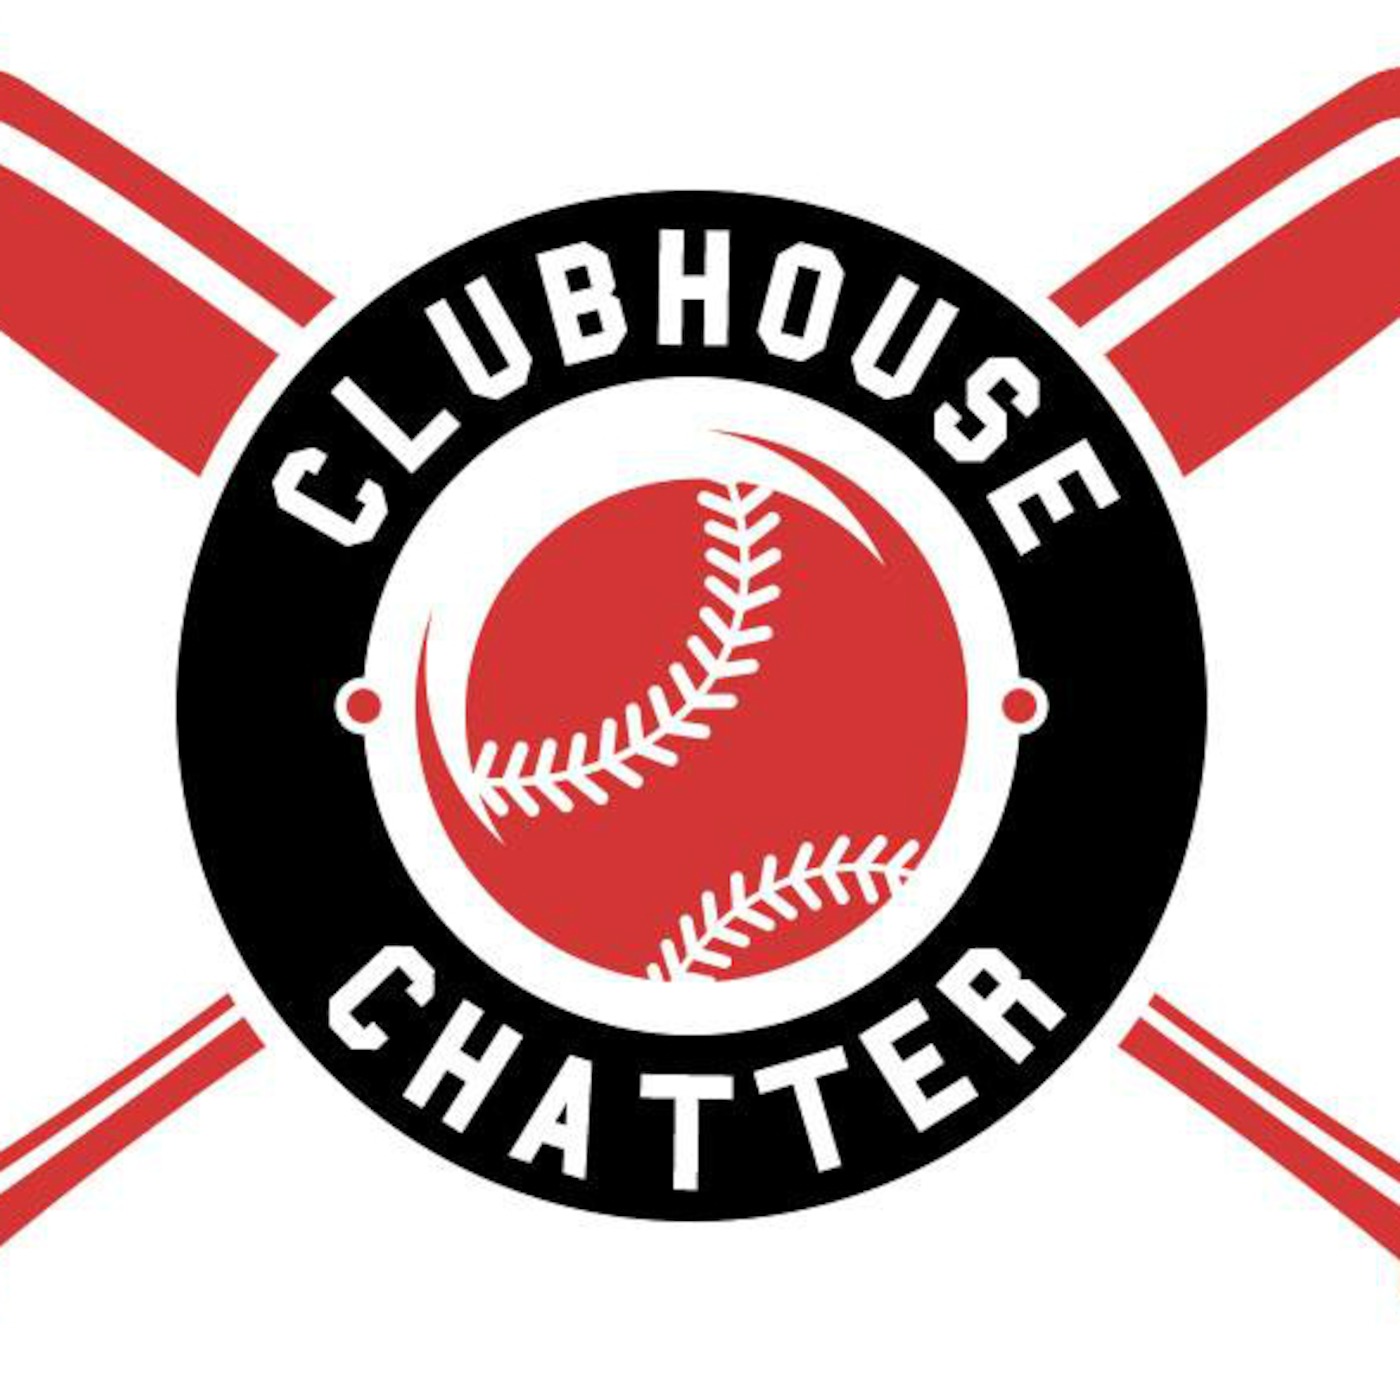 Clubhouse Chatter